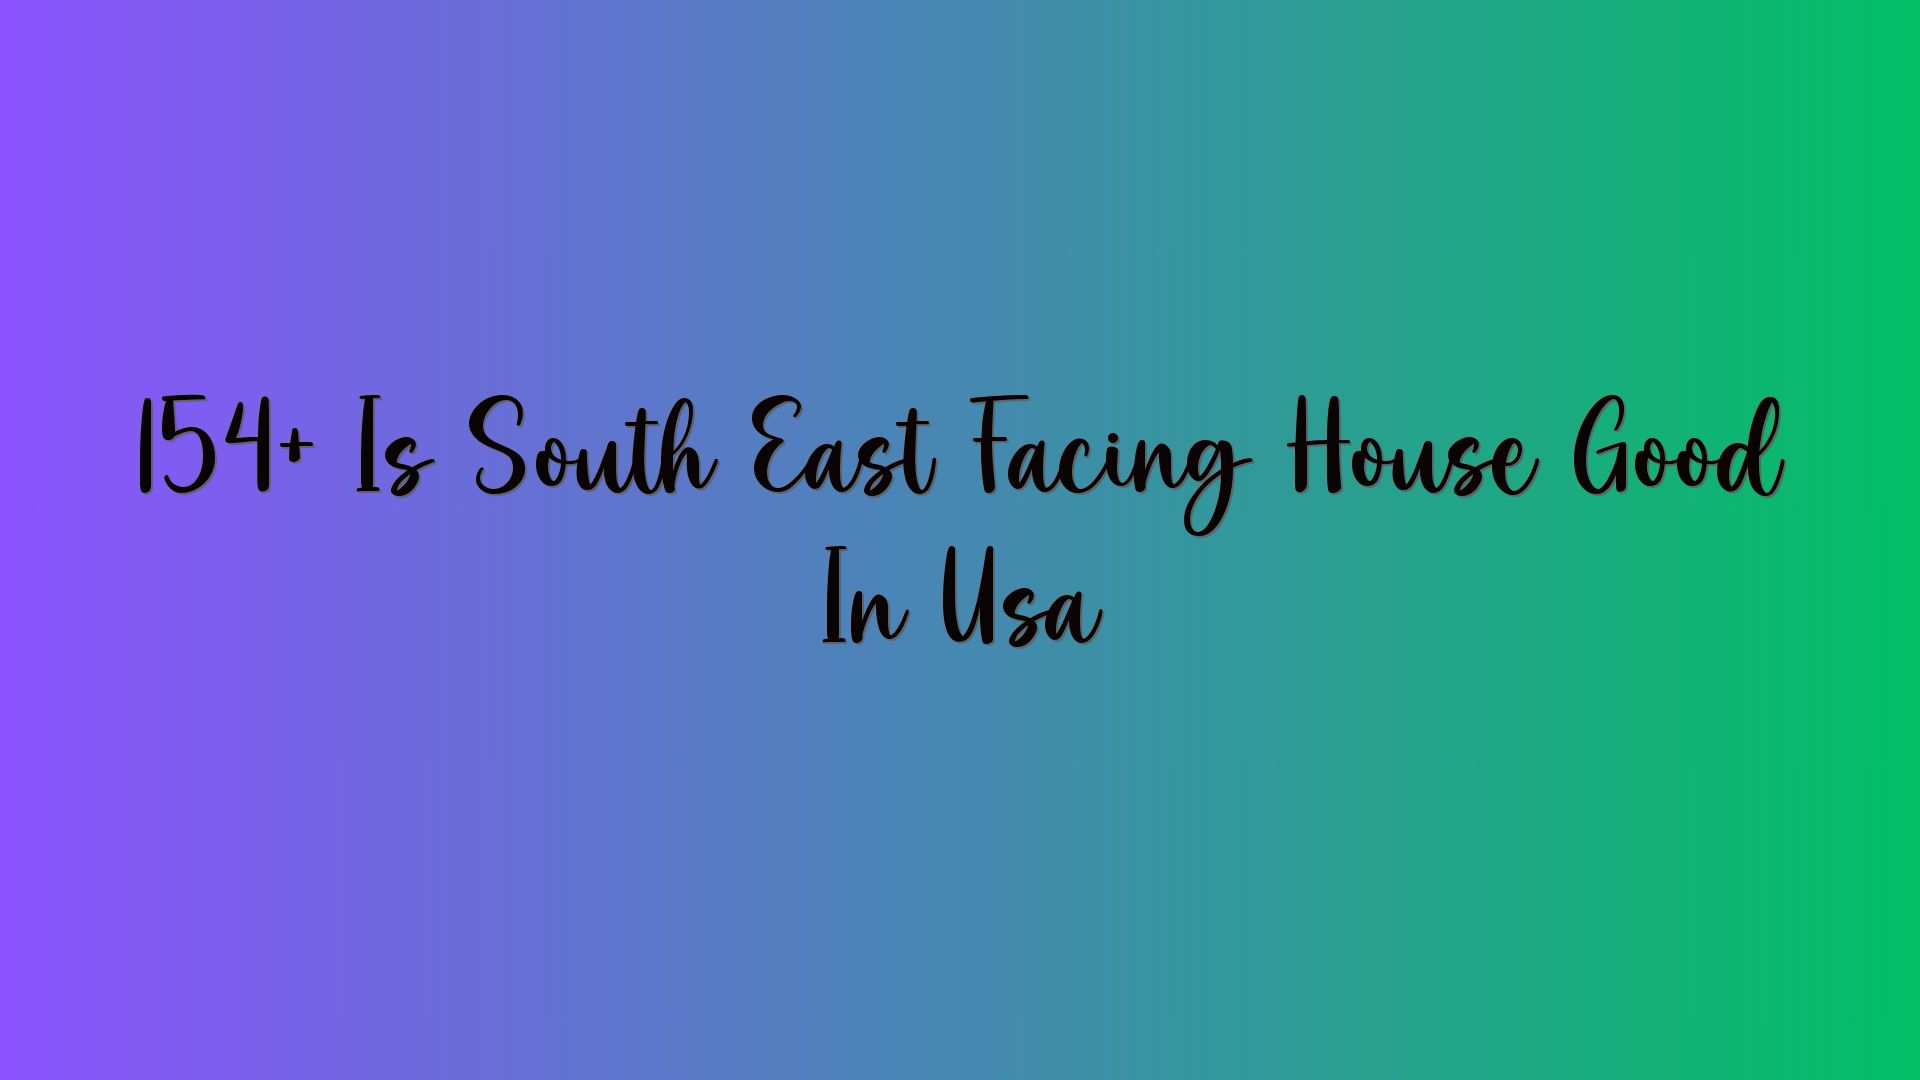 154+ Is South East Facing House Good In Usa